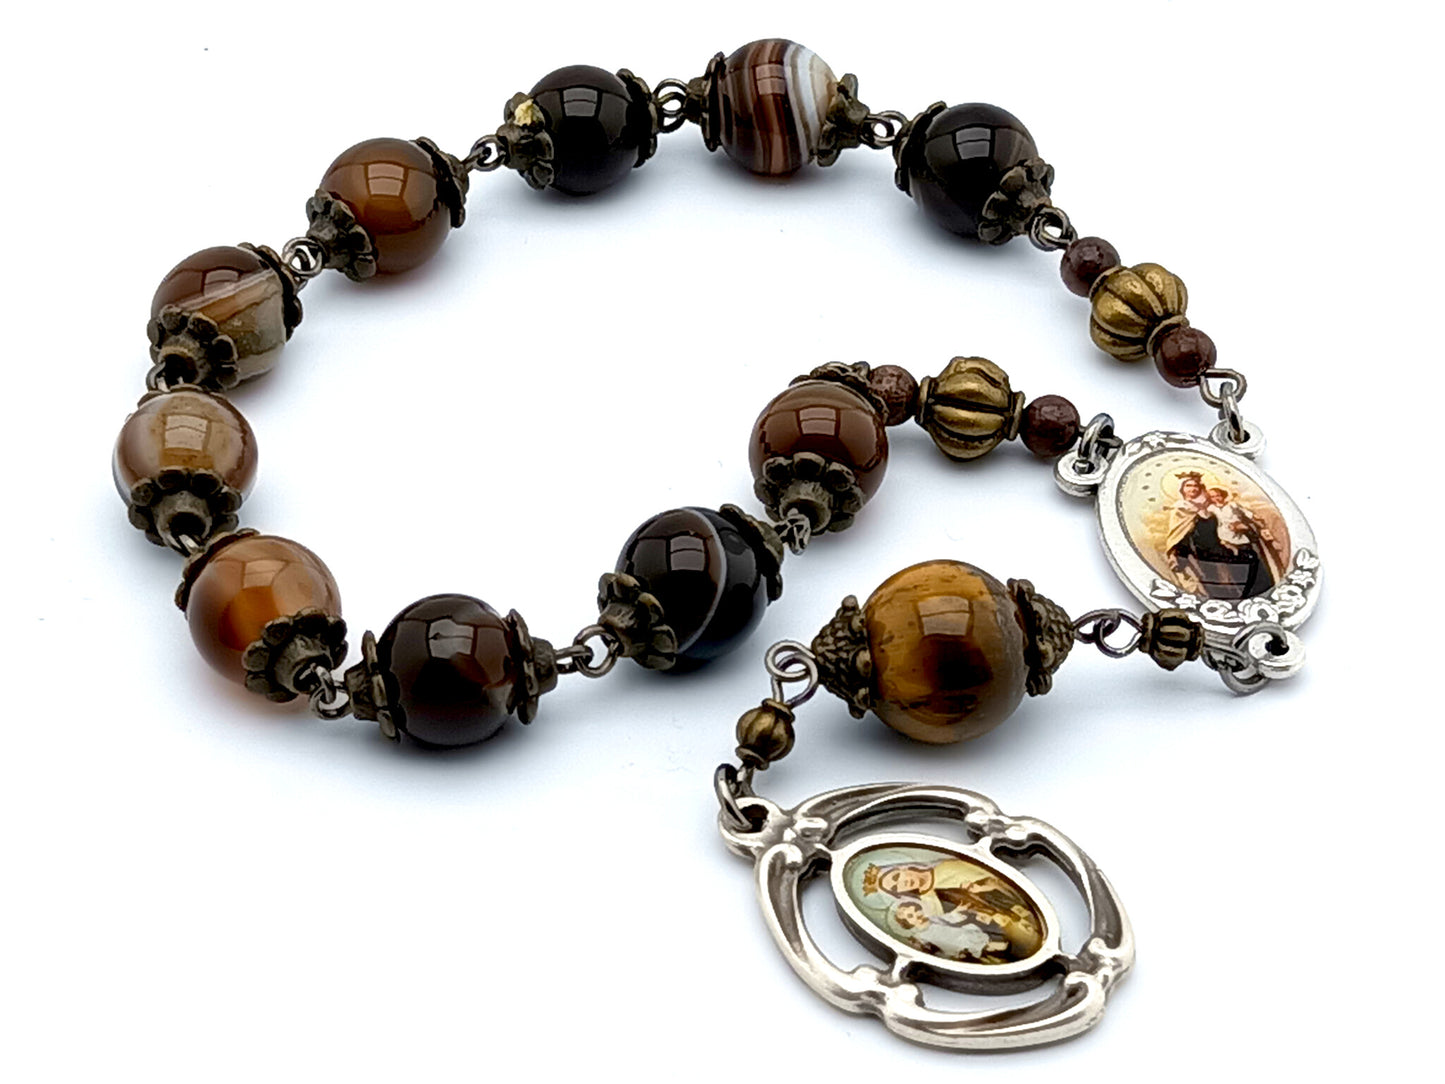 Our lady of Mount Carmel unique rosary beads single decade rosary with agate and tigers eye gemstone beads and silver centre and end medals.